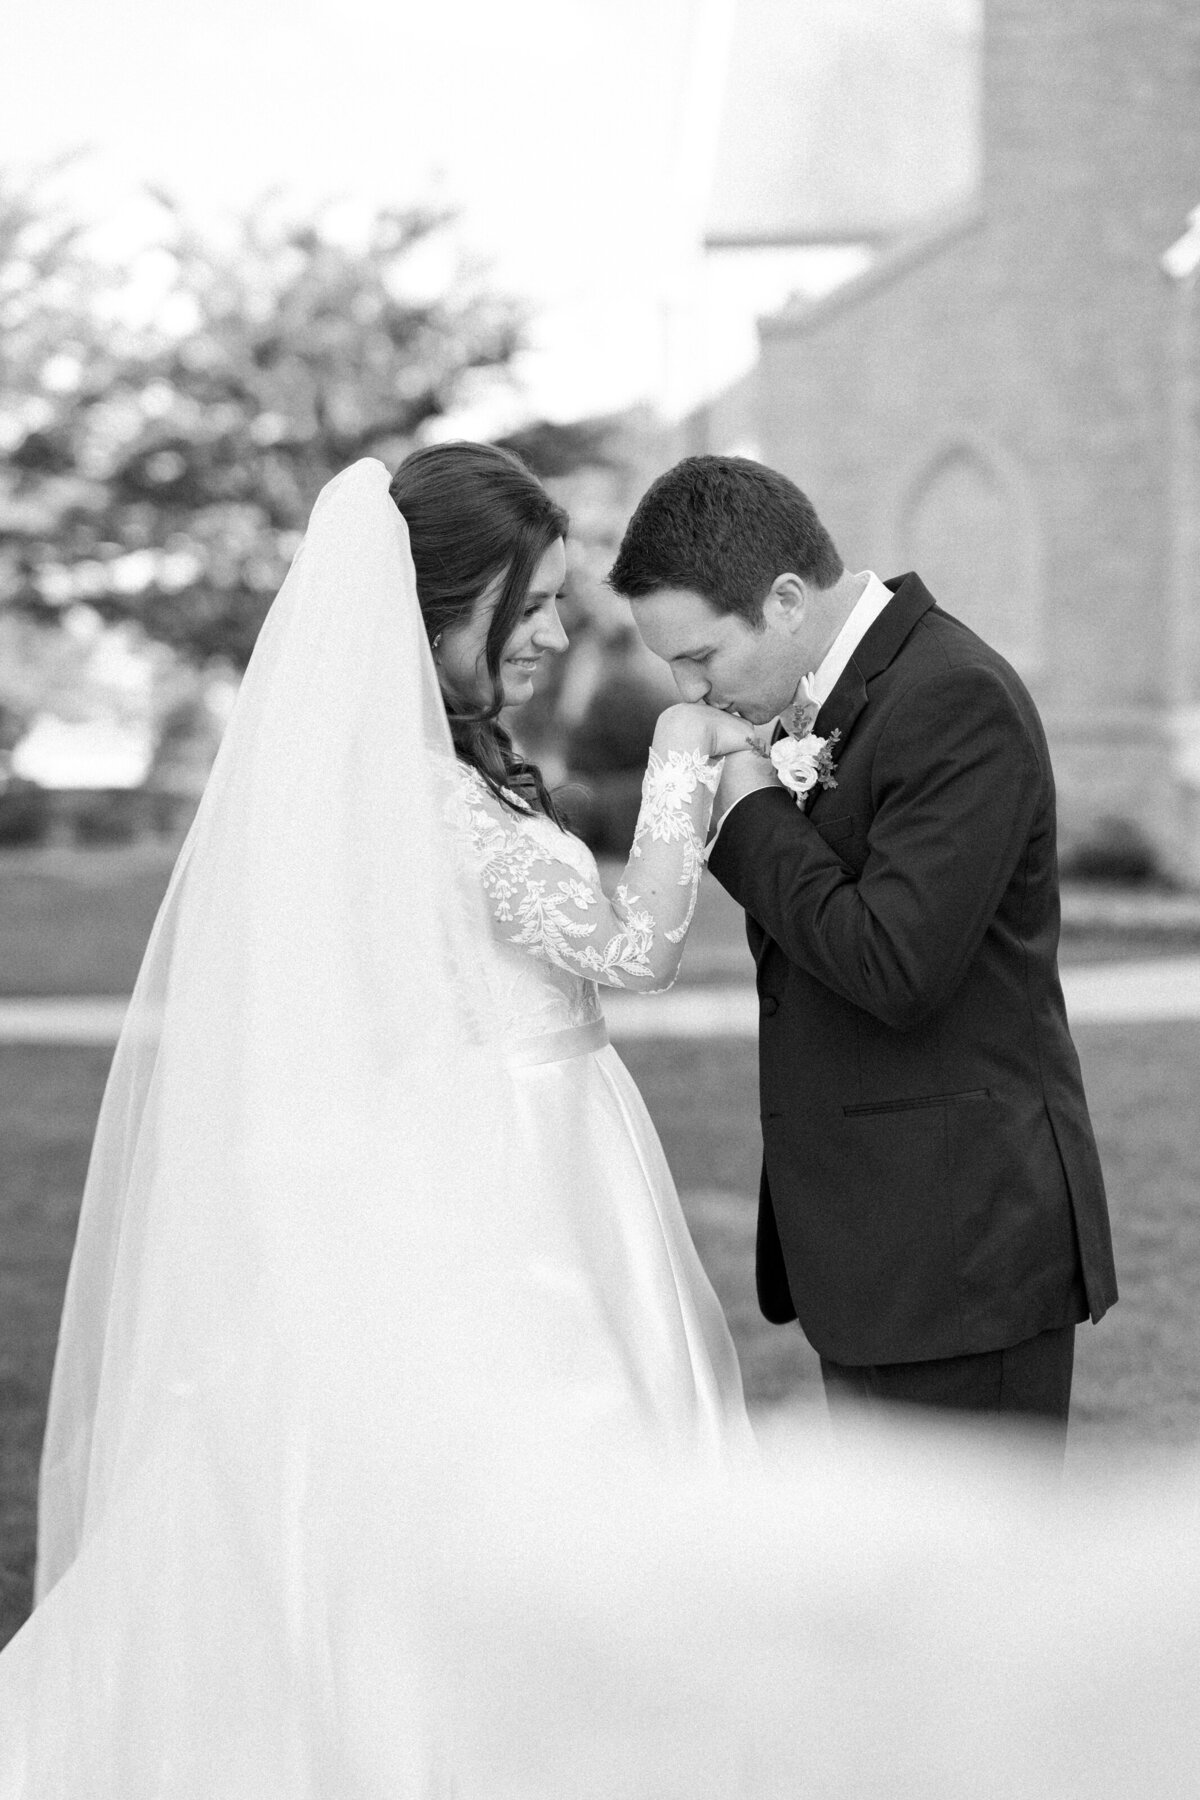 Ellen and Austin - Lee Chapel and Black Fox Farms - East Tennessee and World Wide photographer - Alaina René Photogrpahy-70